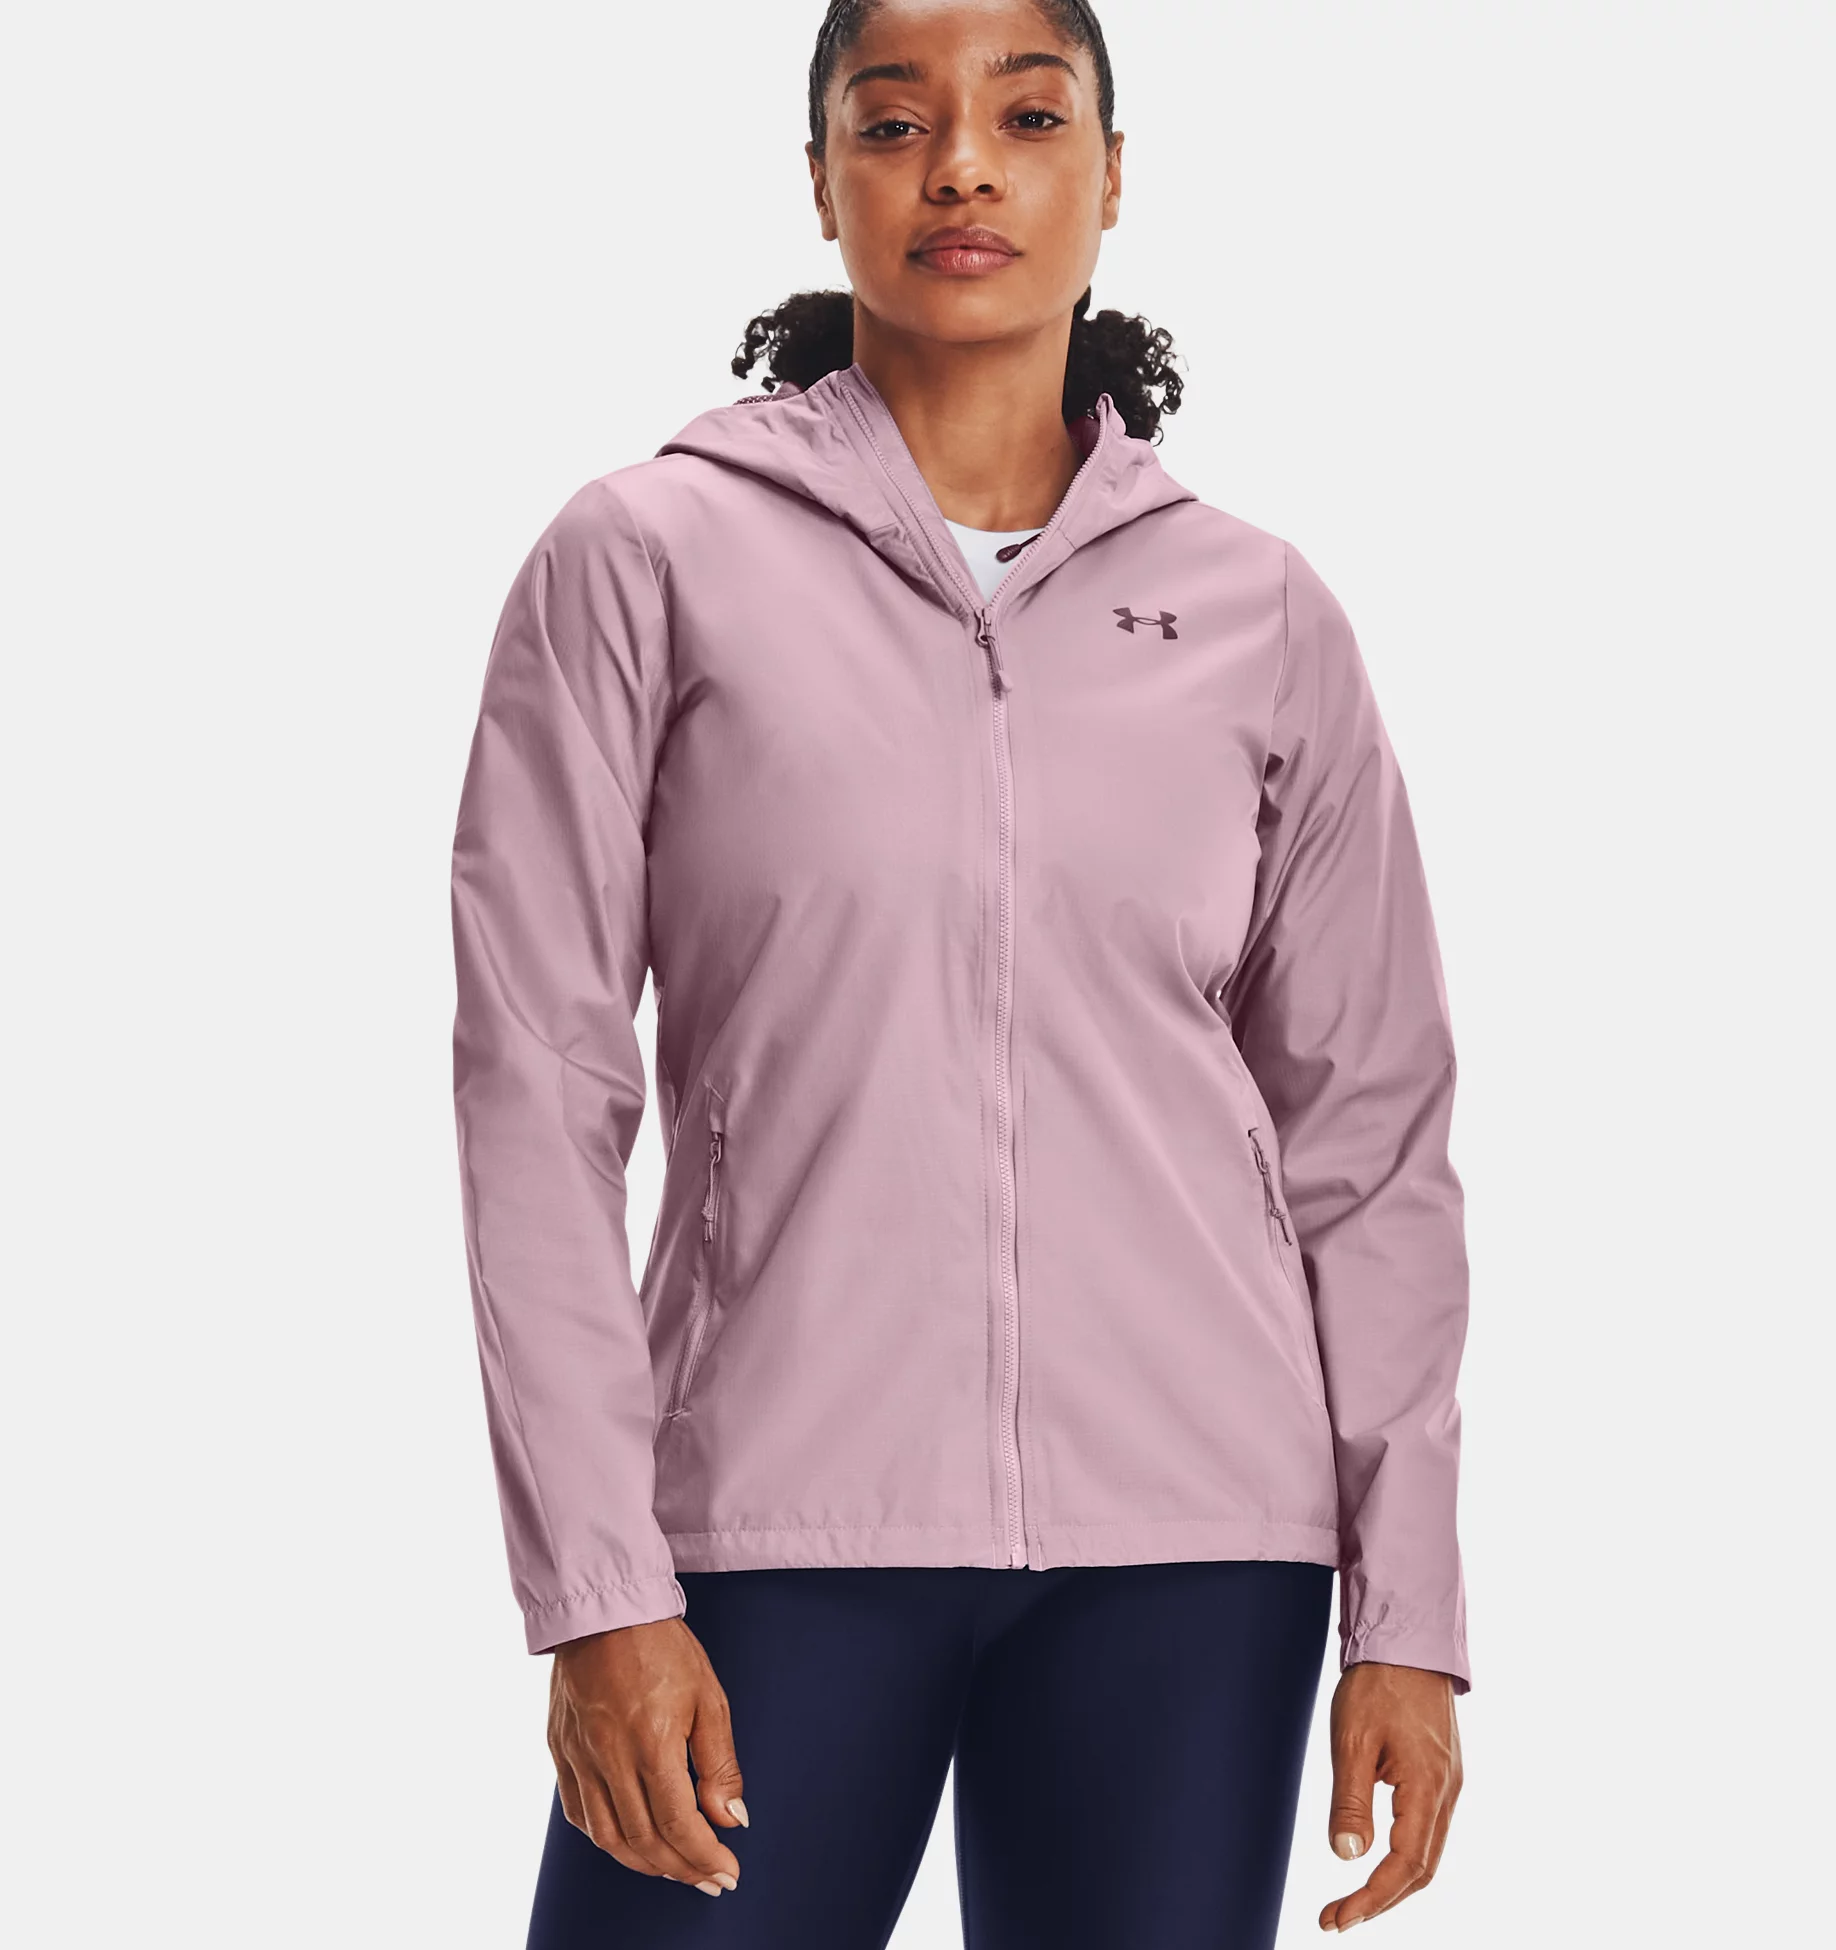 UNDER ARMOUR WOMEN'S FOREFRONT RAIN JACKET ROSE - Freedom Outdoor